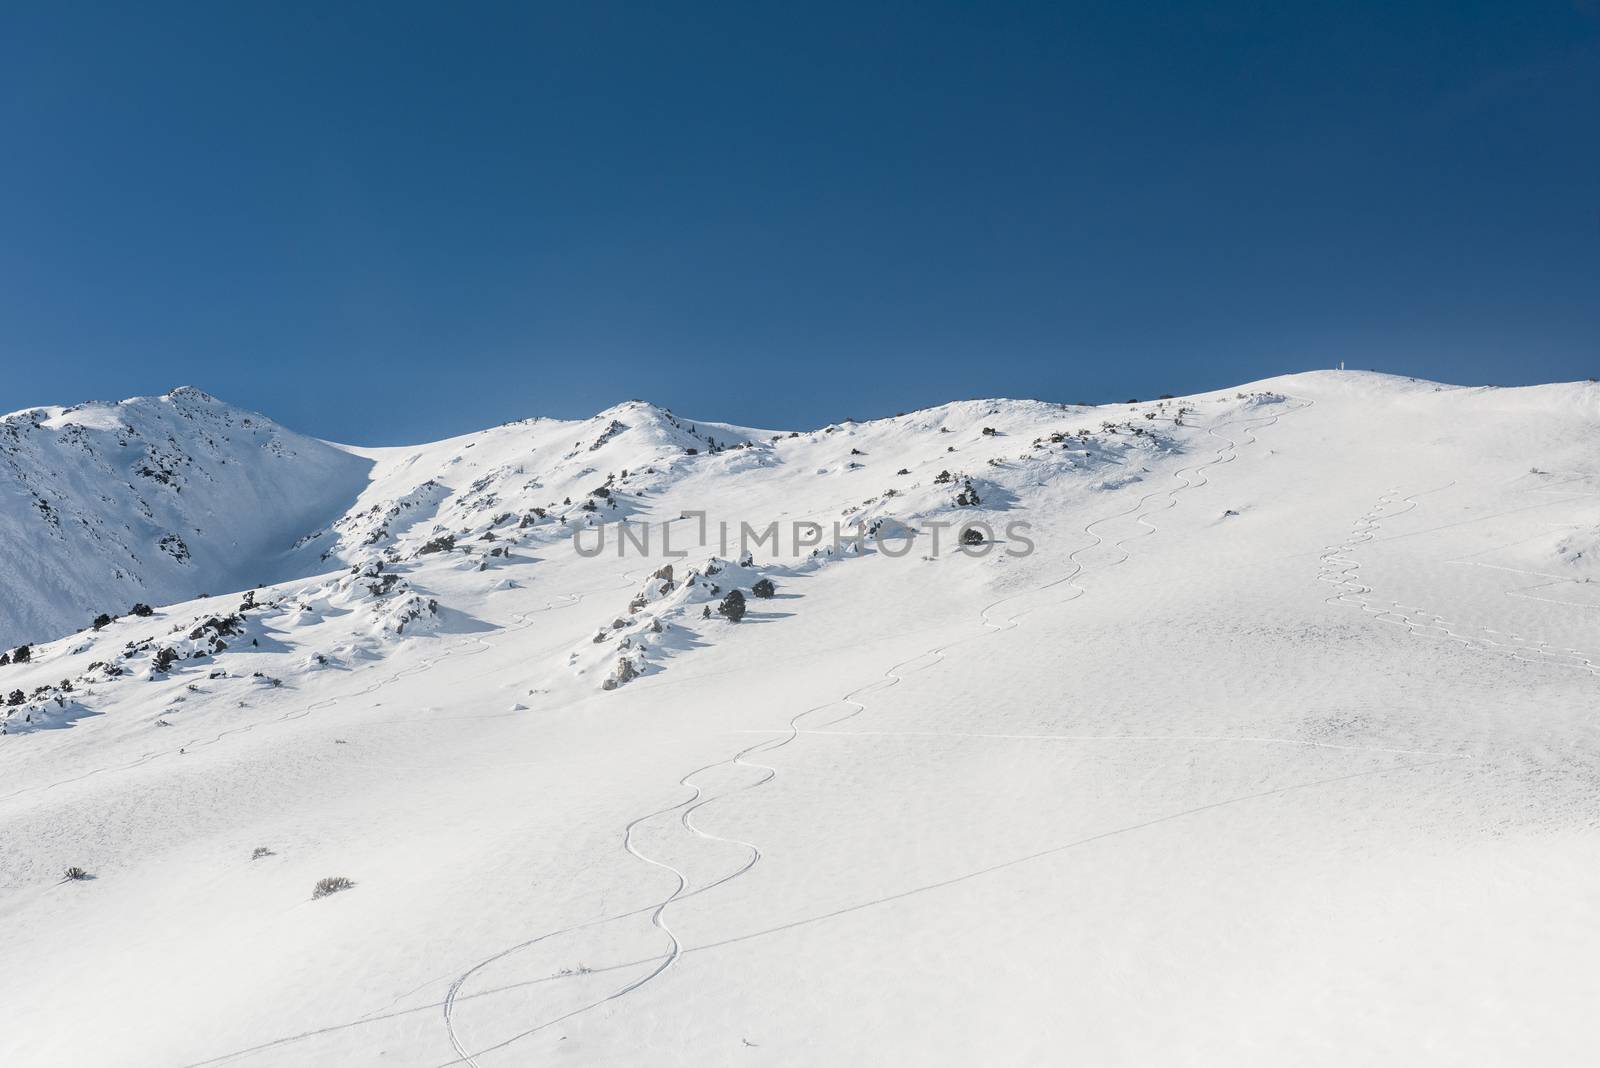 Hillside with ski tracks in Mammoth Lakes, California, January 2 by Njean